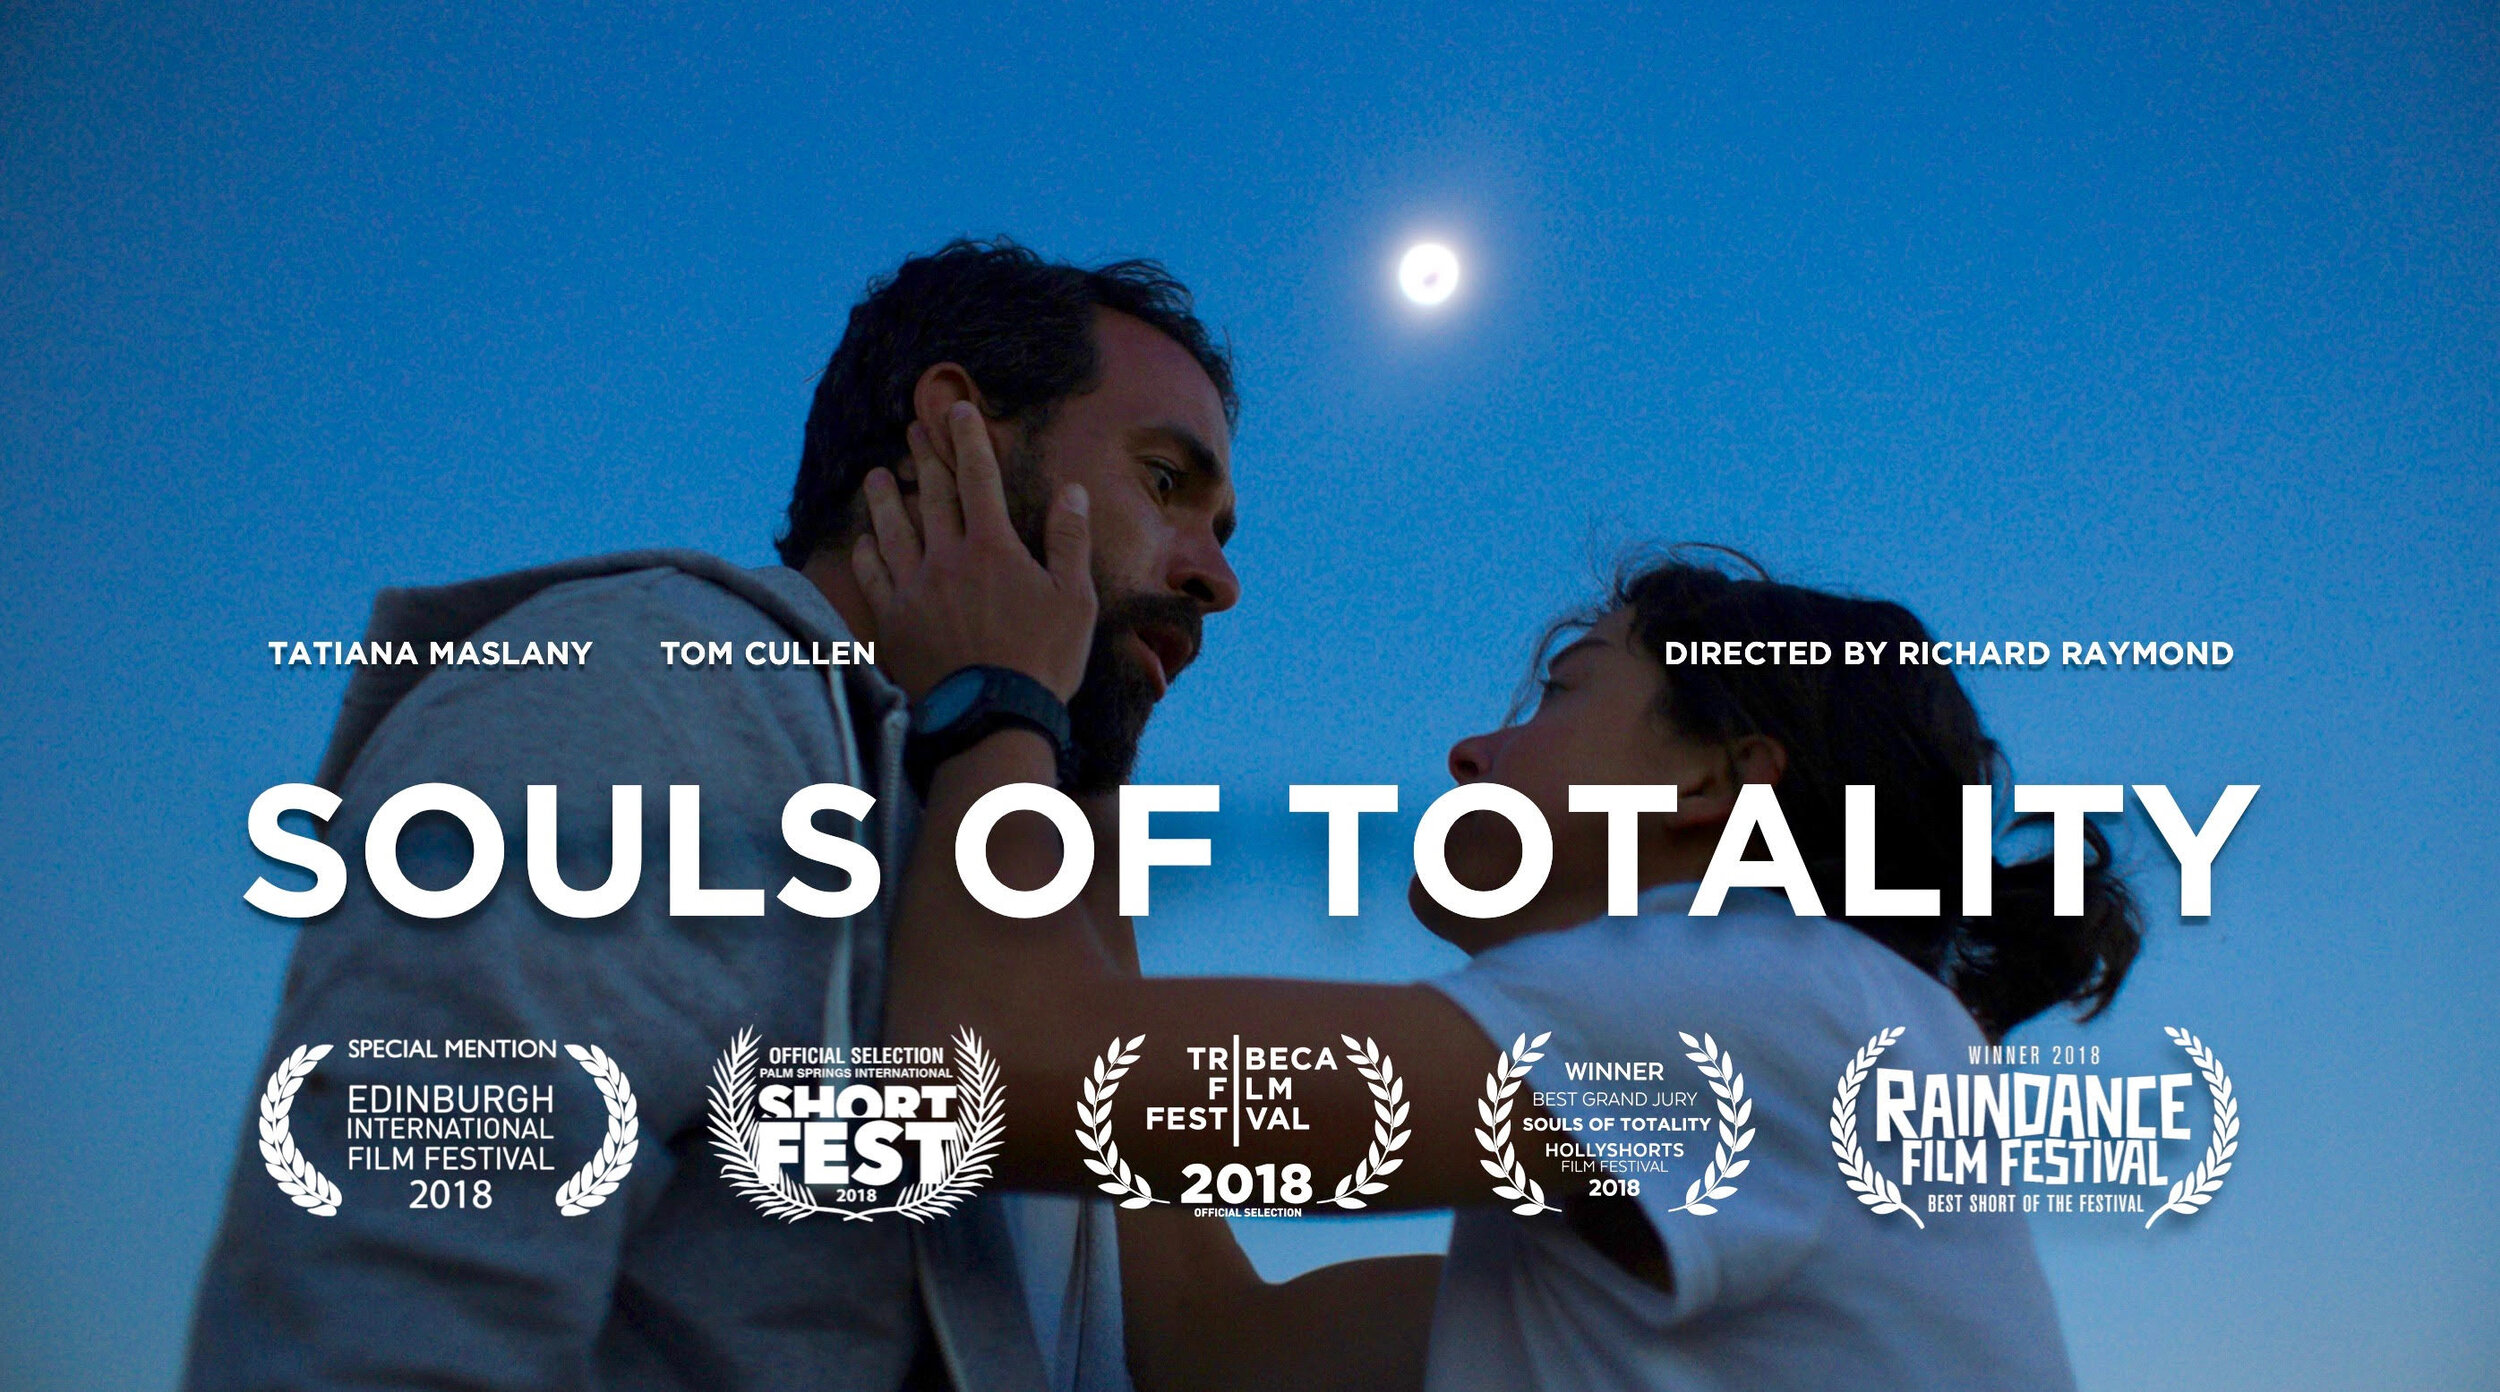 SOULS OF TOTALITY